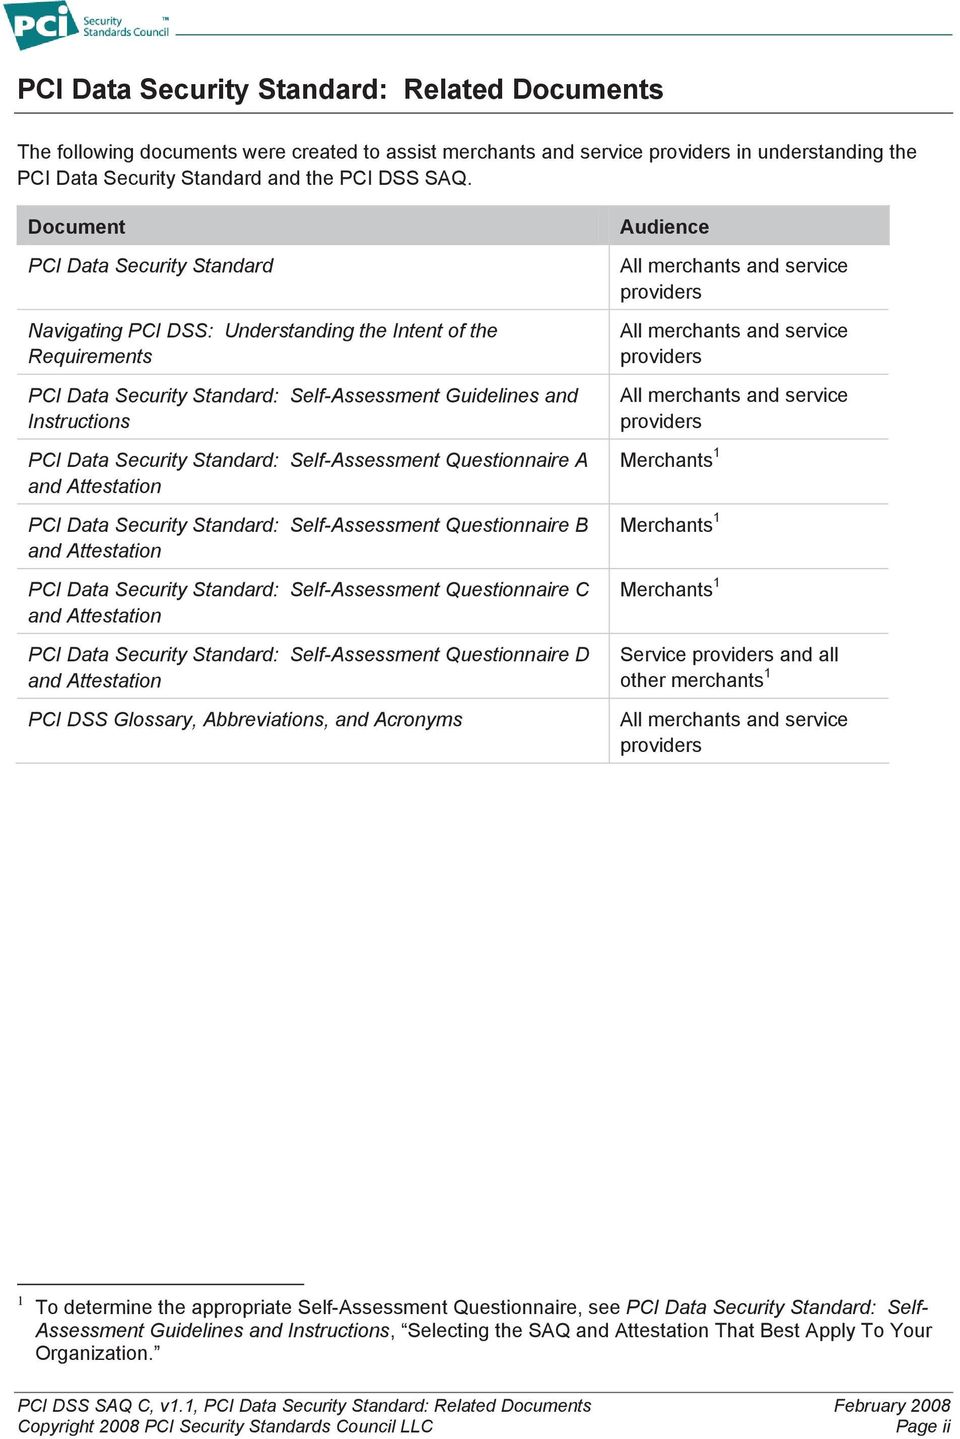 Standard: Self-Assessment Questionnaire A and Attestation PCI Data Security Standard: Self-Assessment Questionnaire B and Attestation PCI Data Security Standard: Self-Assessment Questionnaire C and